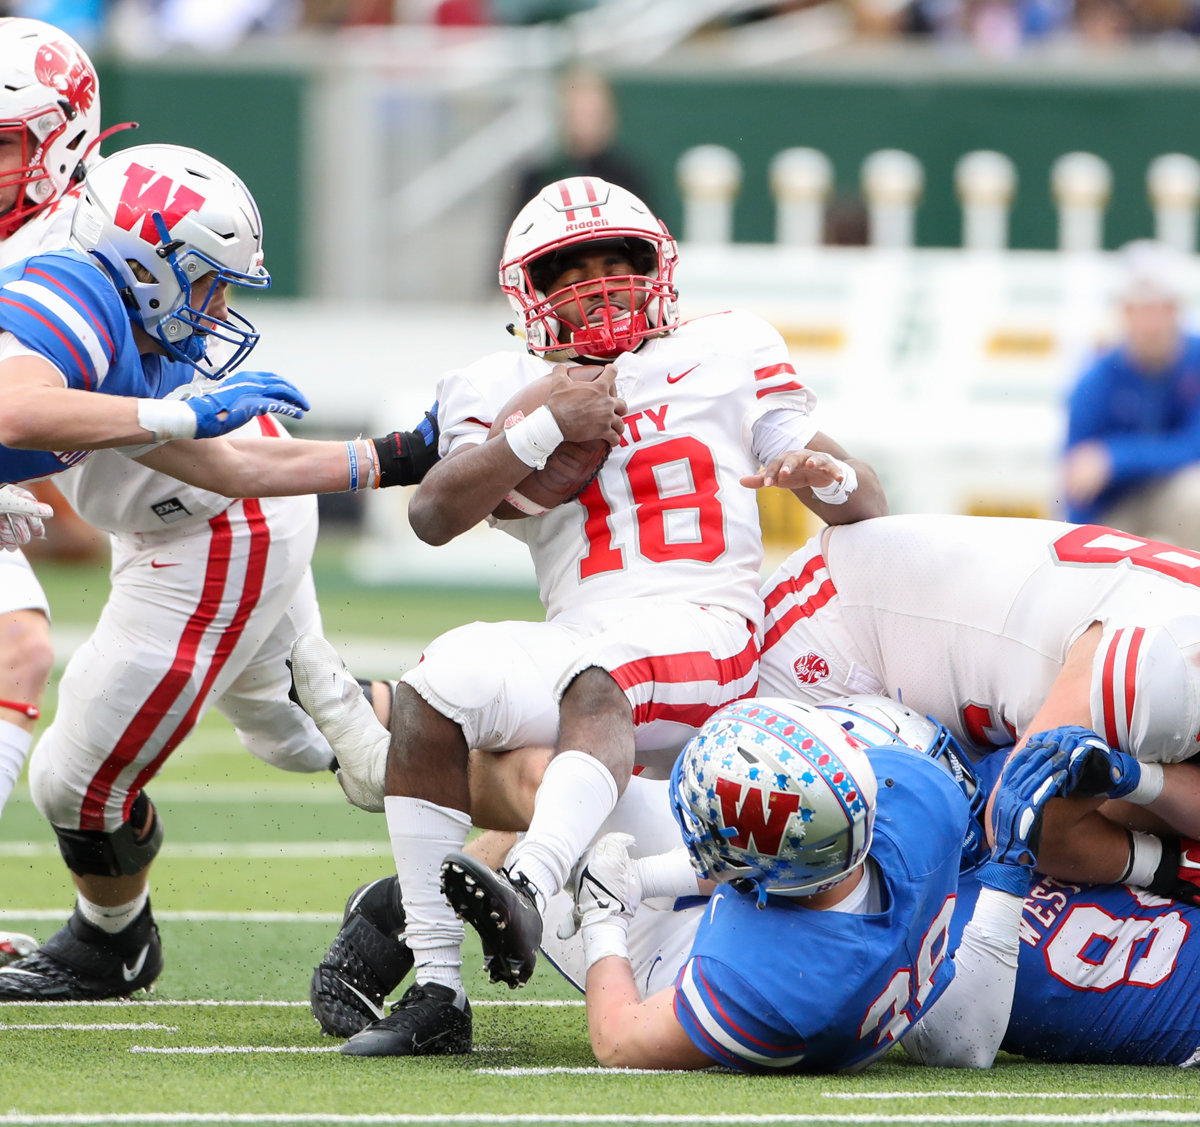 Katy Tigers running back Dallas Glass (18) is tackled during the Class 6A Division II state semifinal  game between Katy and Westlake on December 11, 2021 in Waco, Texas.